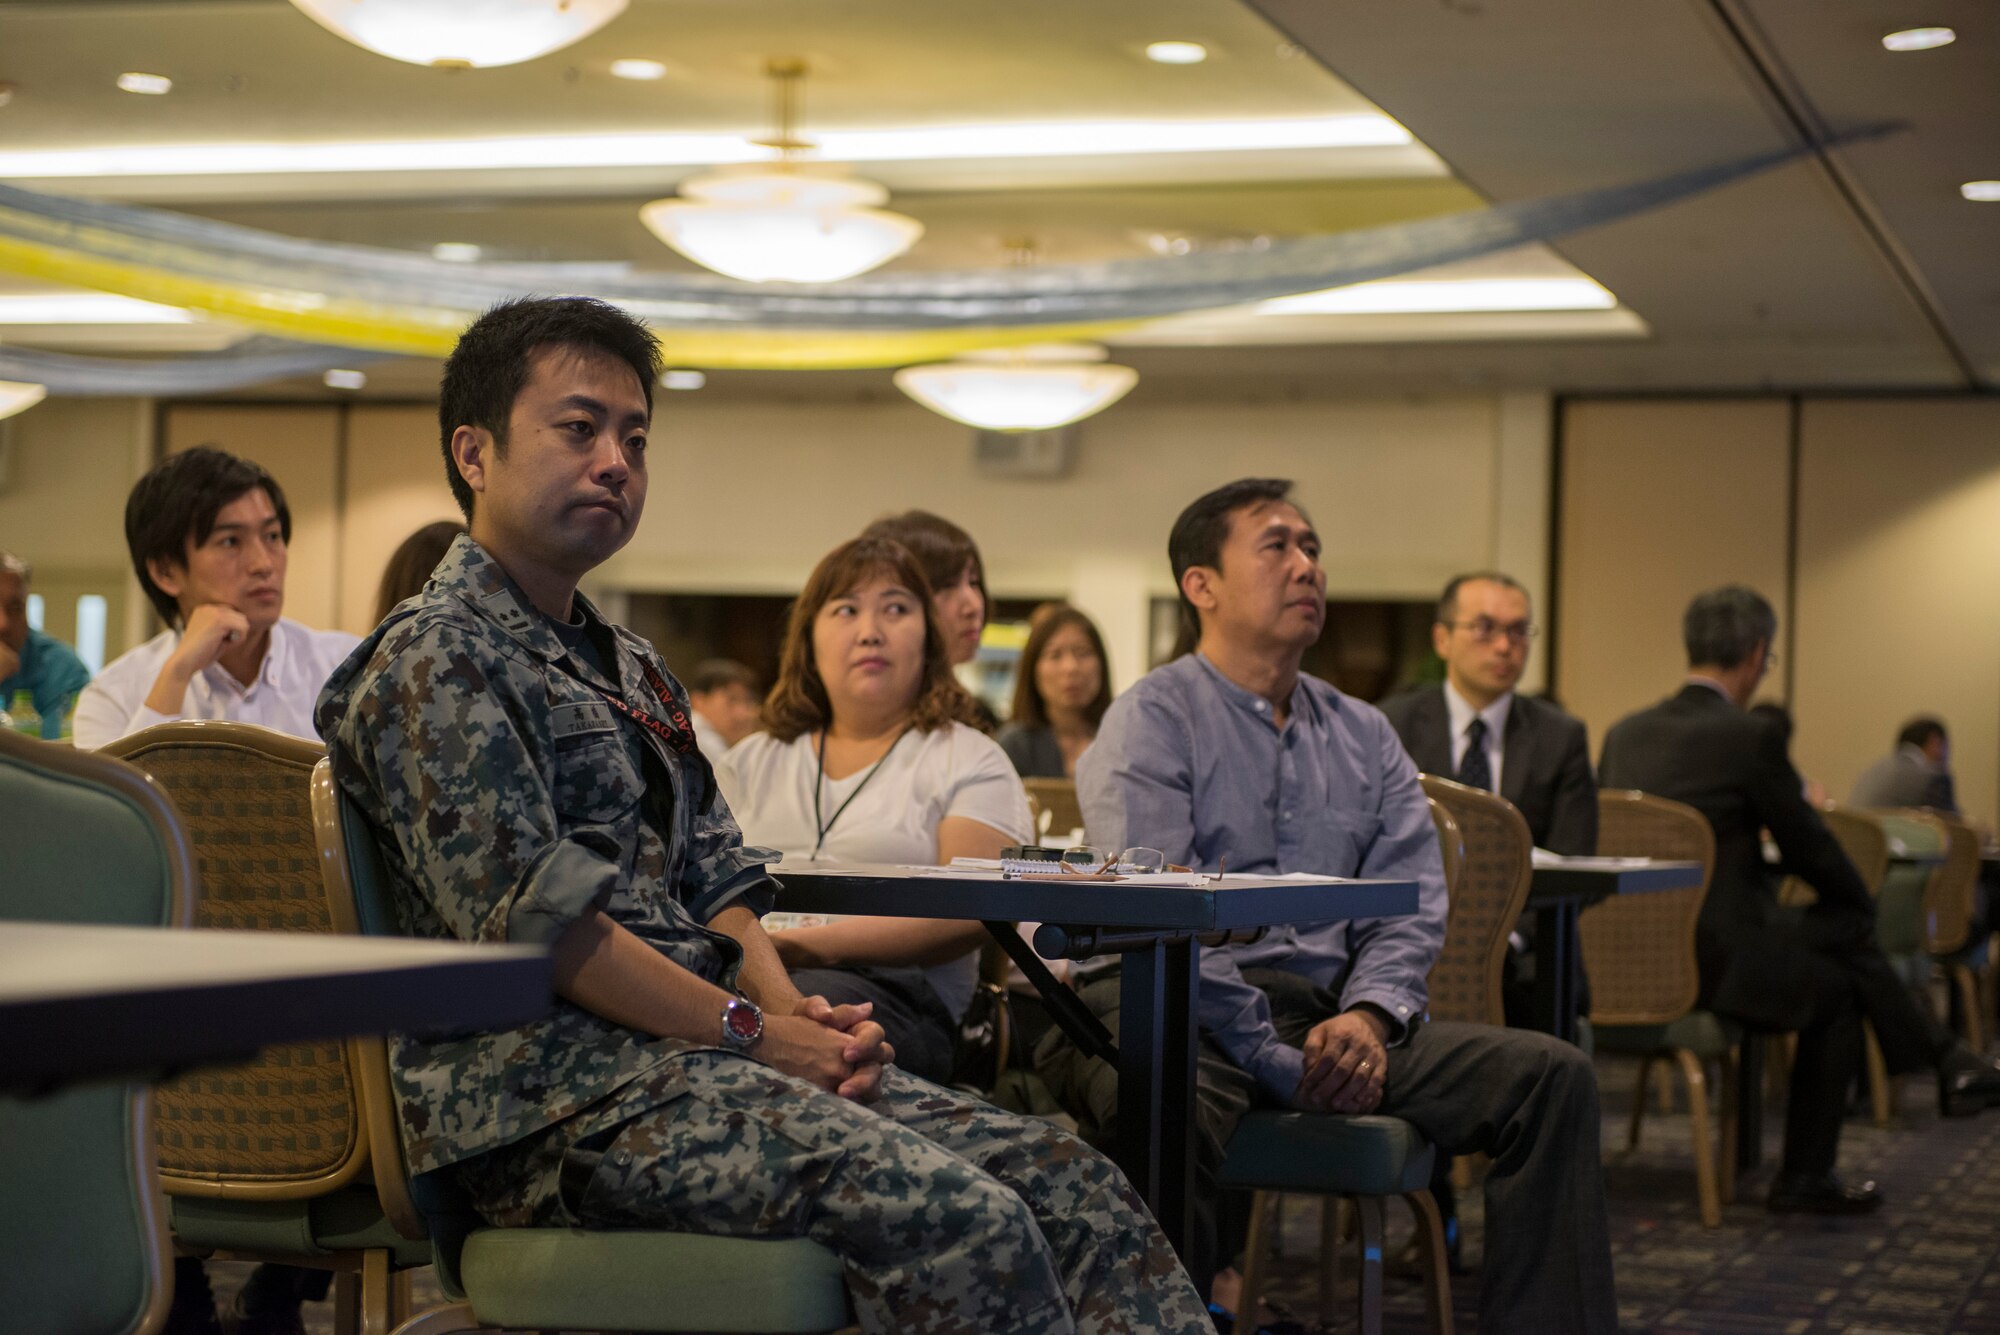 A Japan Self-Defense Force member and representatives from local businesses listen to a speech given during a Vendor Fair event at Yokota Air Base, Japan, June 10, 2015. The fair was hosted by the 374th Contracting Squadron to inform local businesses of opportunities to work with the U.S. government and put money back into the local community. (U.S. Air Force photo by Staff Sgt. Cody H. Ramirez/Released)